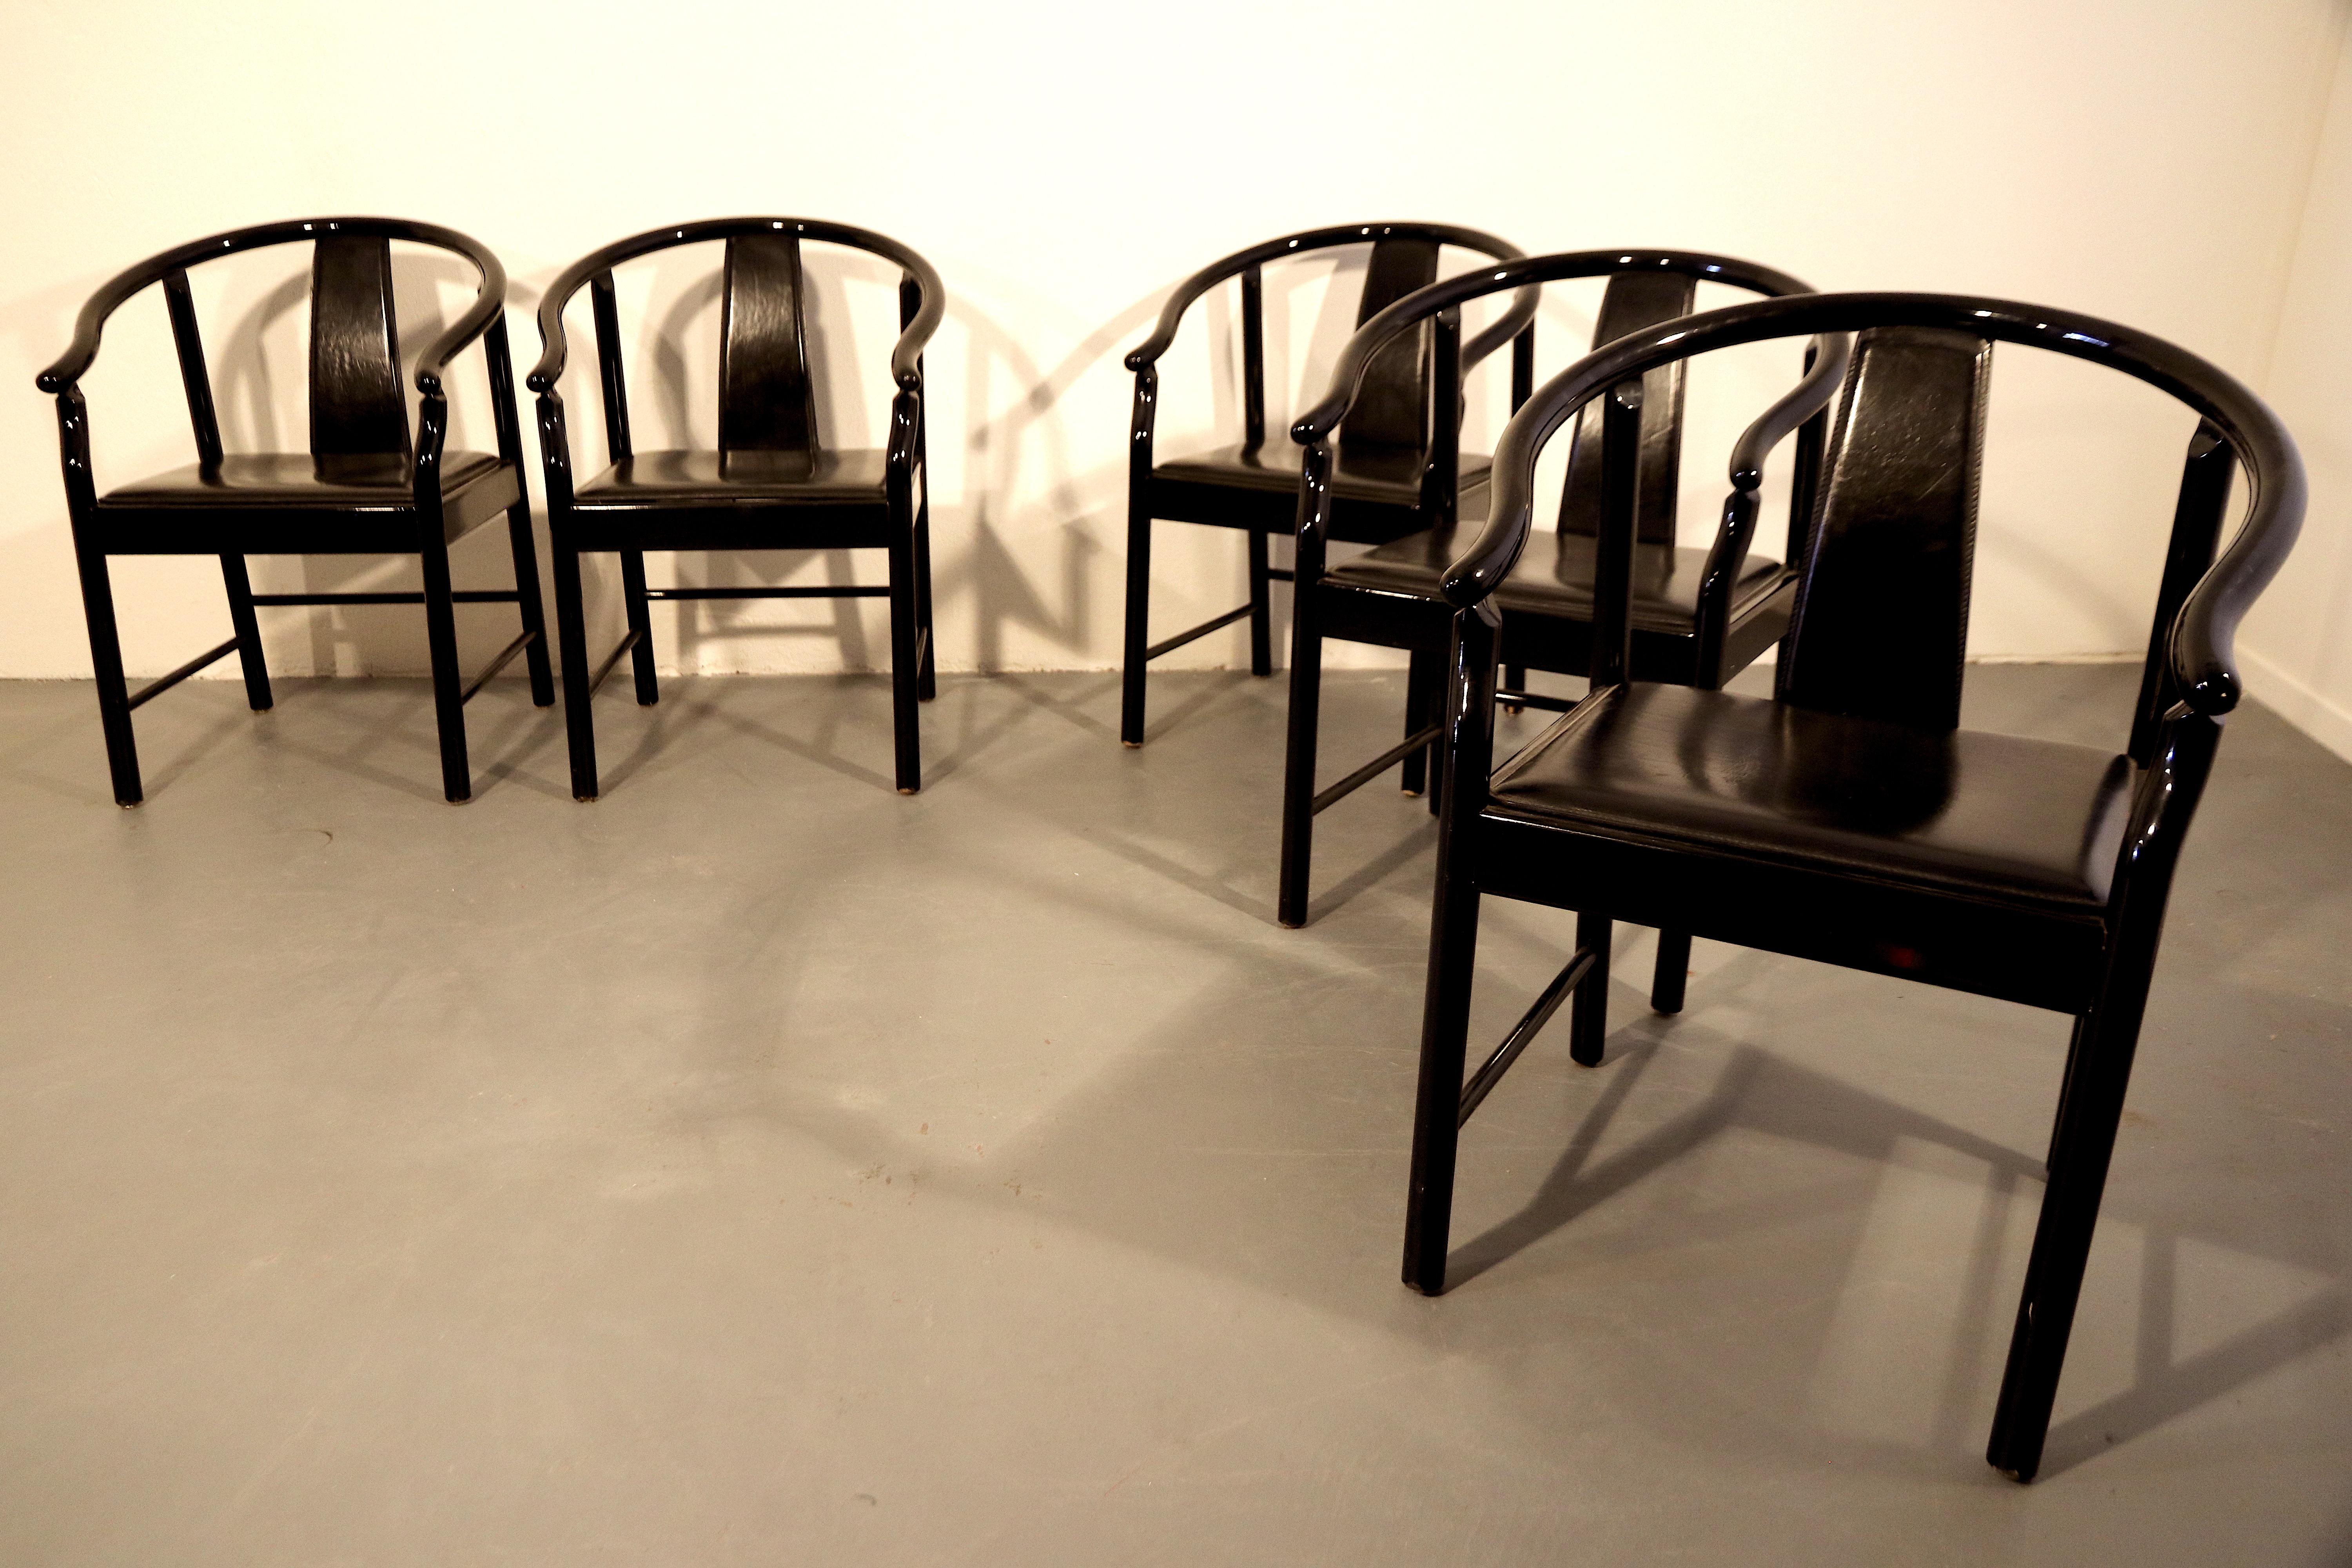 Set of five - 5 - beautifully shaped and very chic high-gloss black lacquered dining chairs made of solid bent wood, and a seat and back upholstered in an evenly high gloss black calf leather. They are all in an excellent condition. This listing is